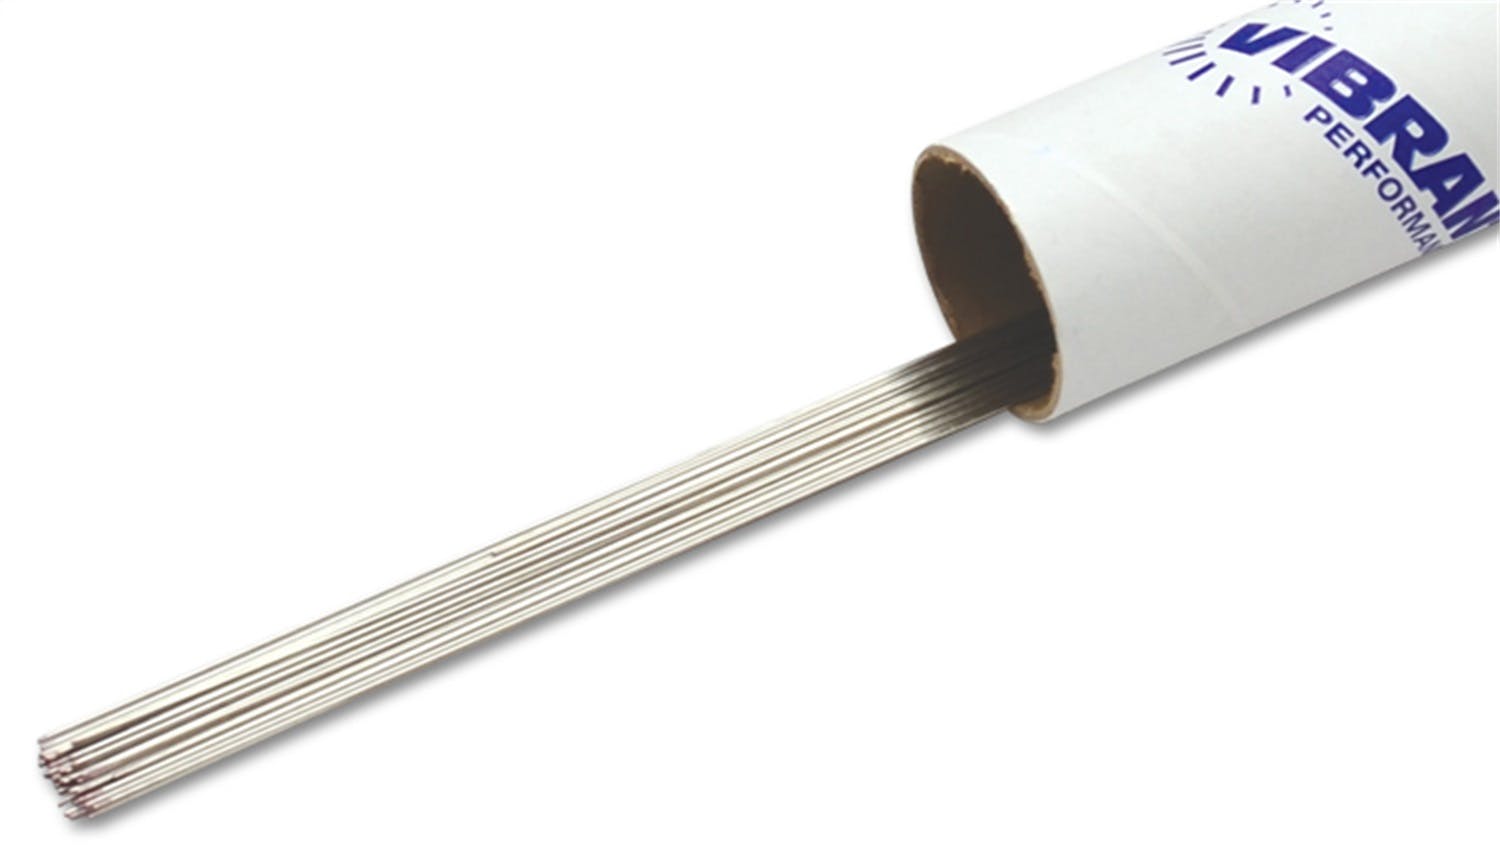 Vibrant Performance 29163 Wire Stainless Steel ER308L - 0.062 inch Thick (1.6mm) - 39.5 inch Long Rod - 3lb box